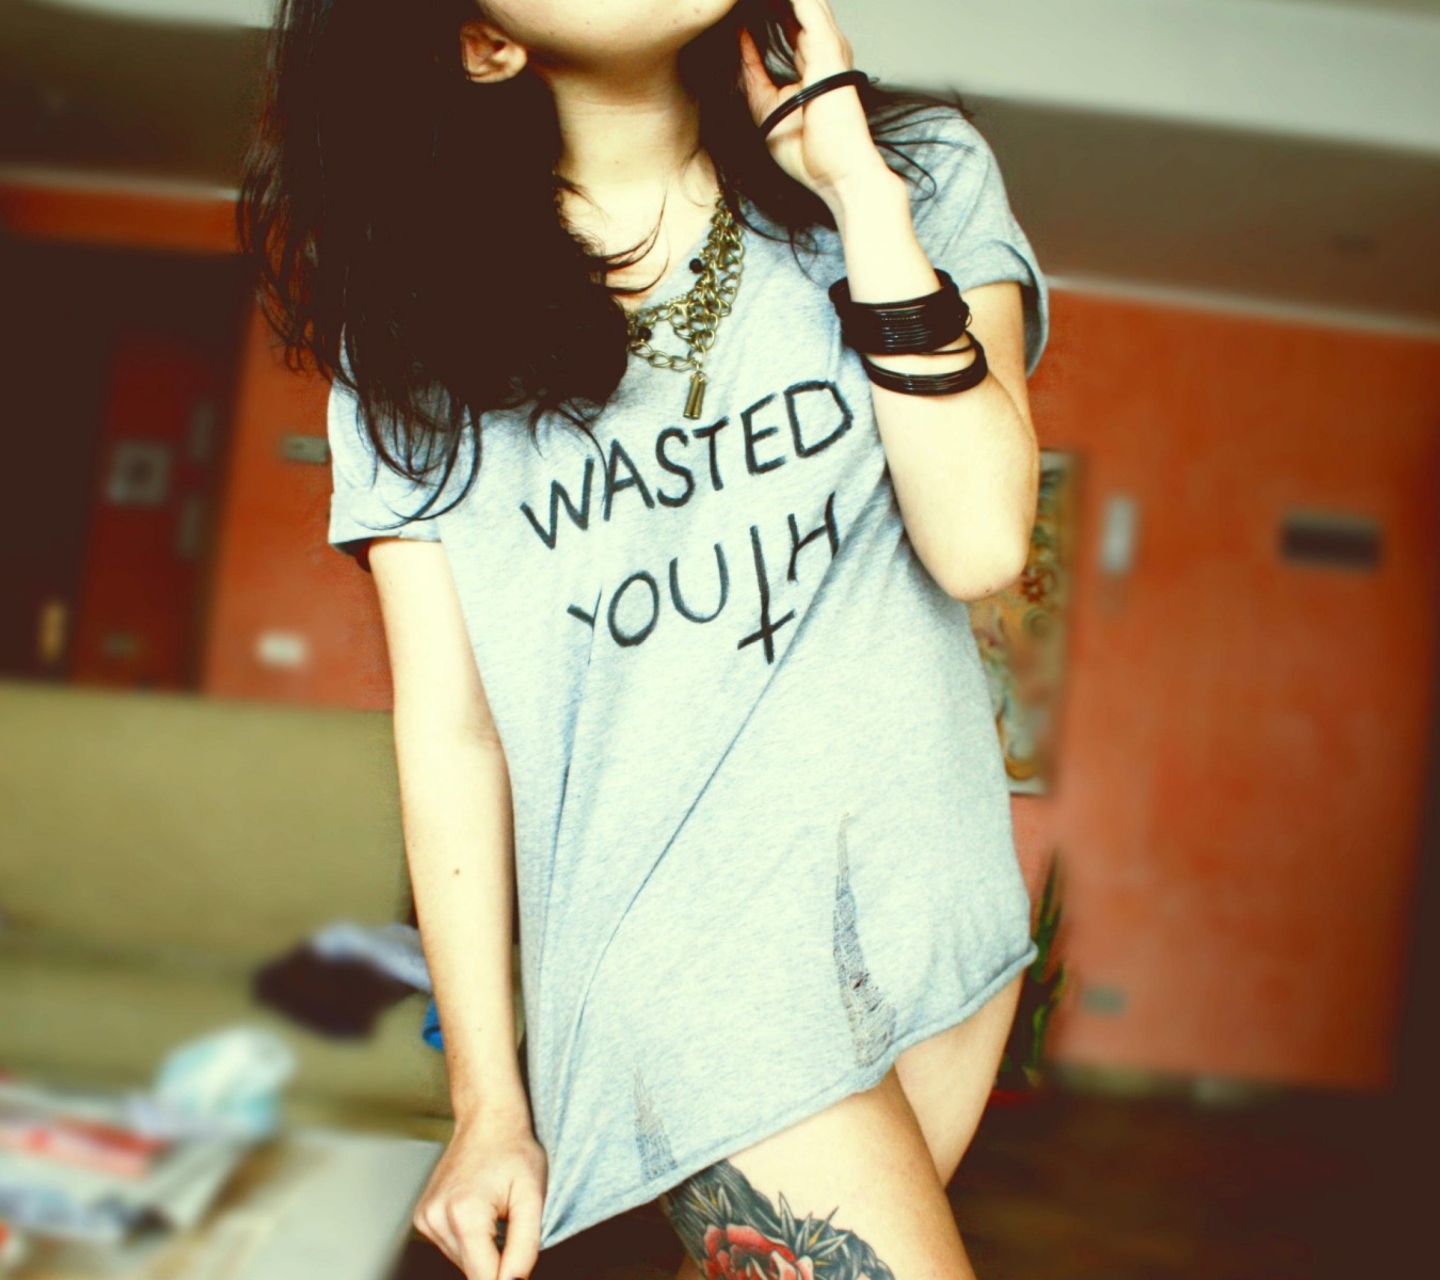 Wasted Youth T-Shirt wallpaper 1440x1280